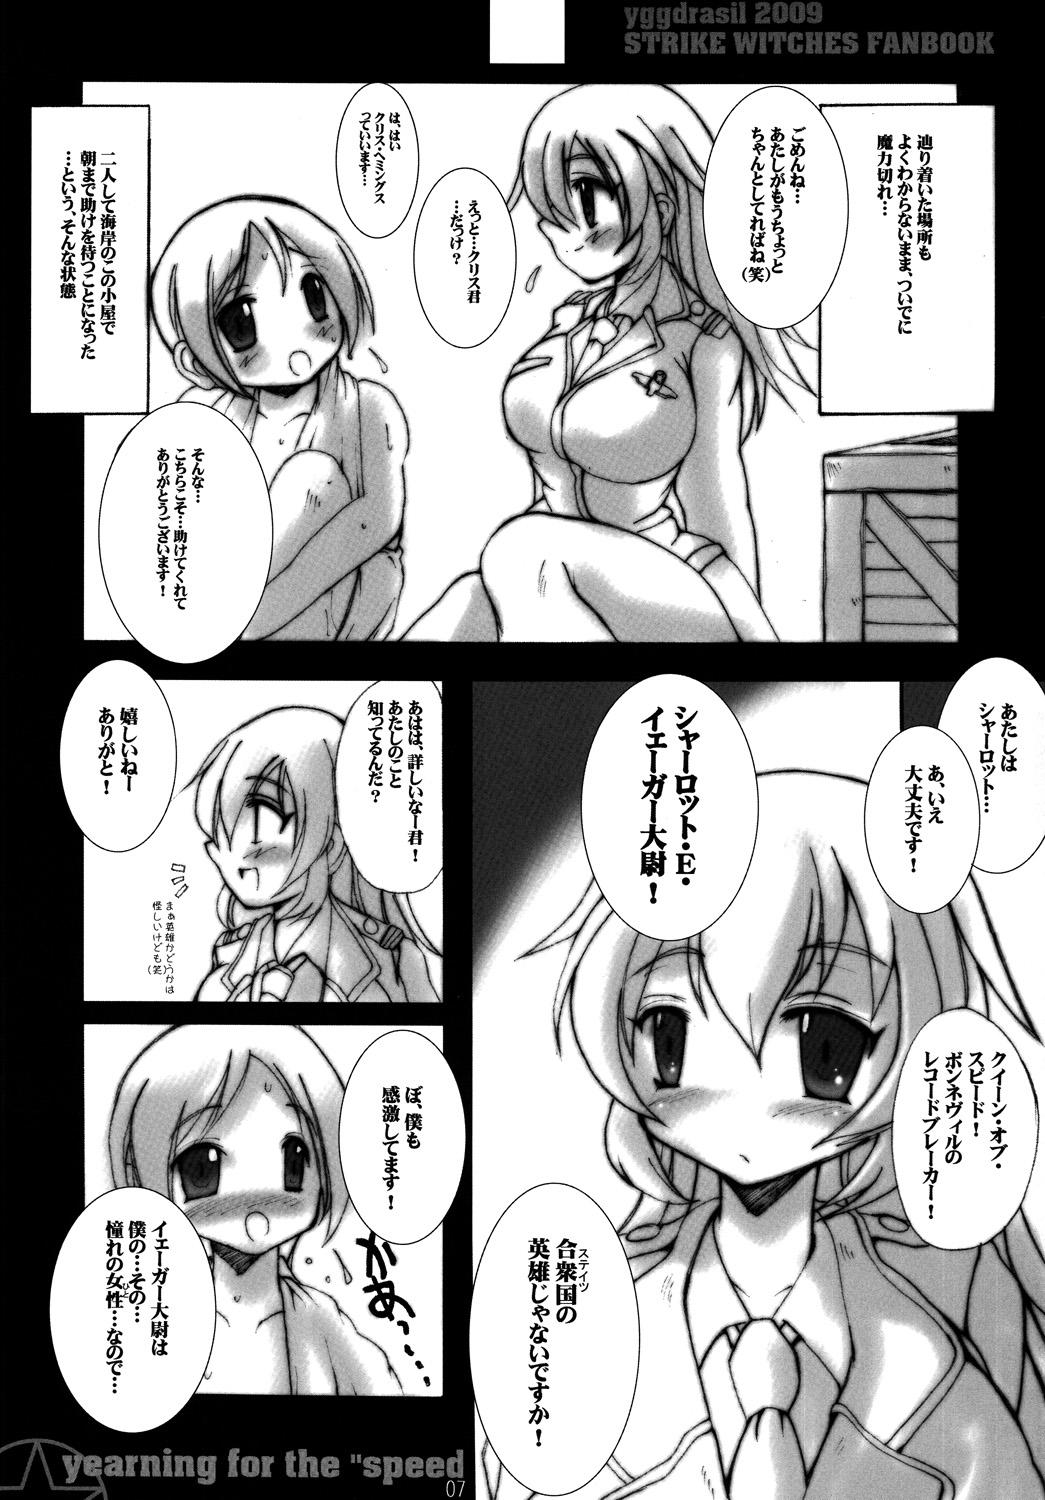 Masterbate yearning for the “speed” - Strike witches Bath - Page 6